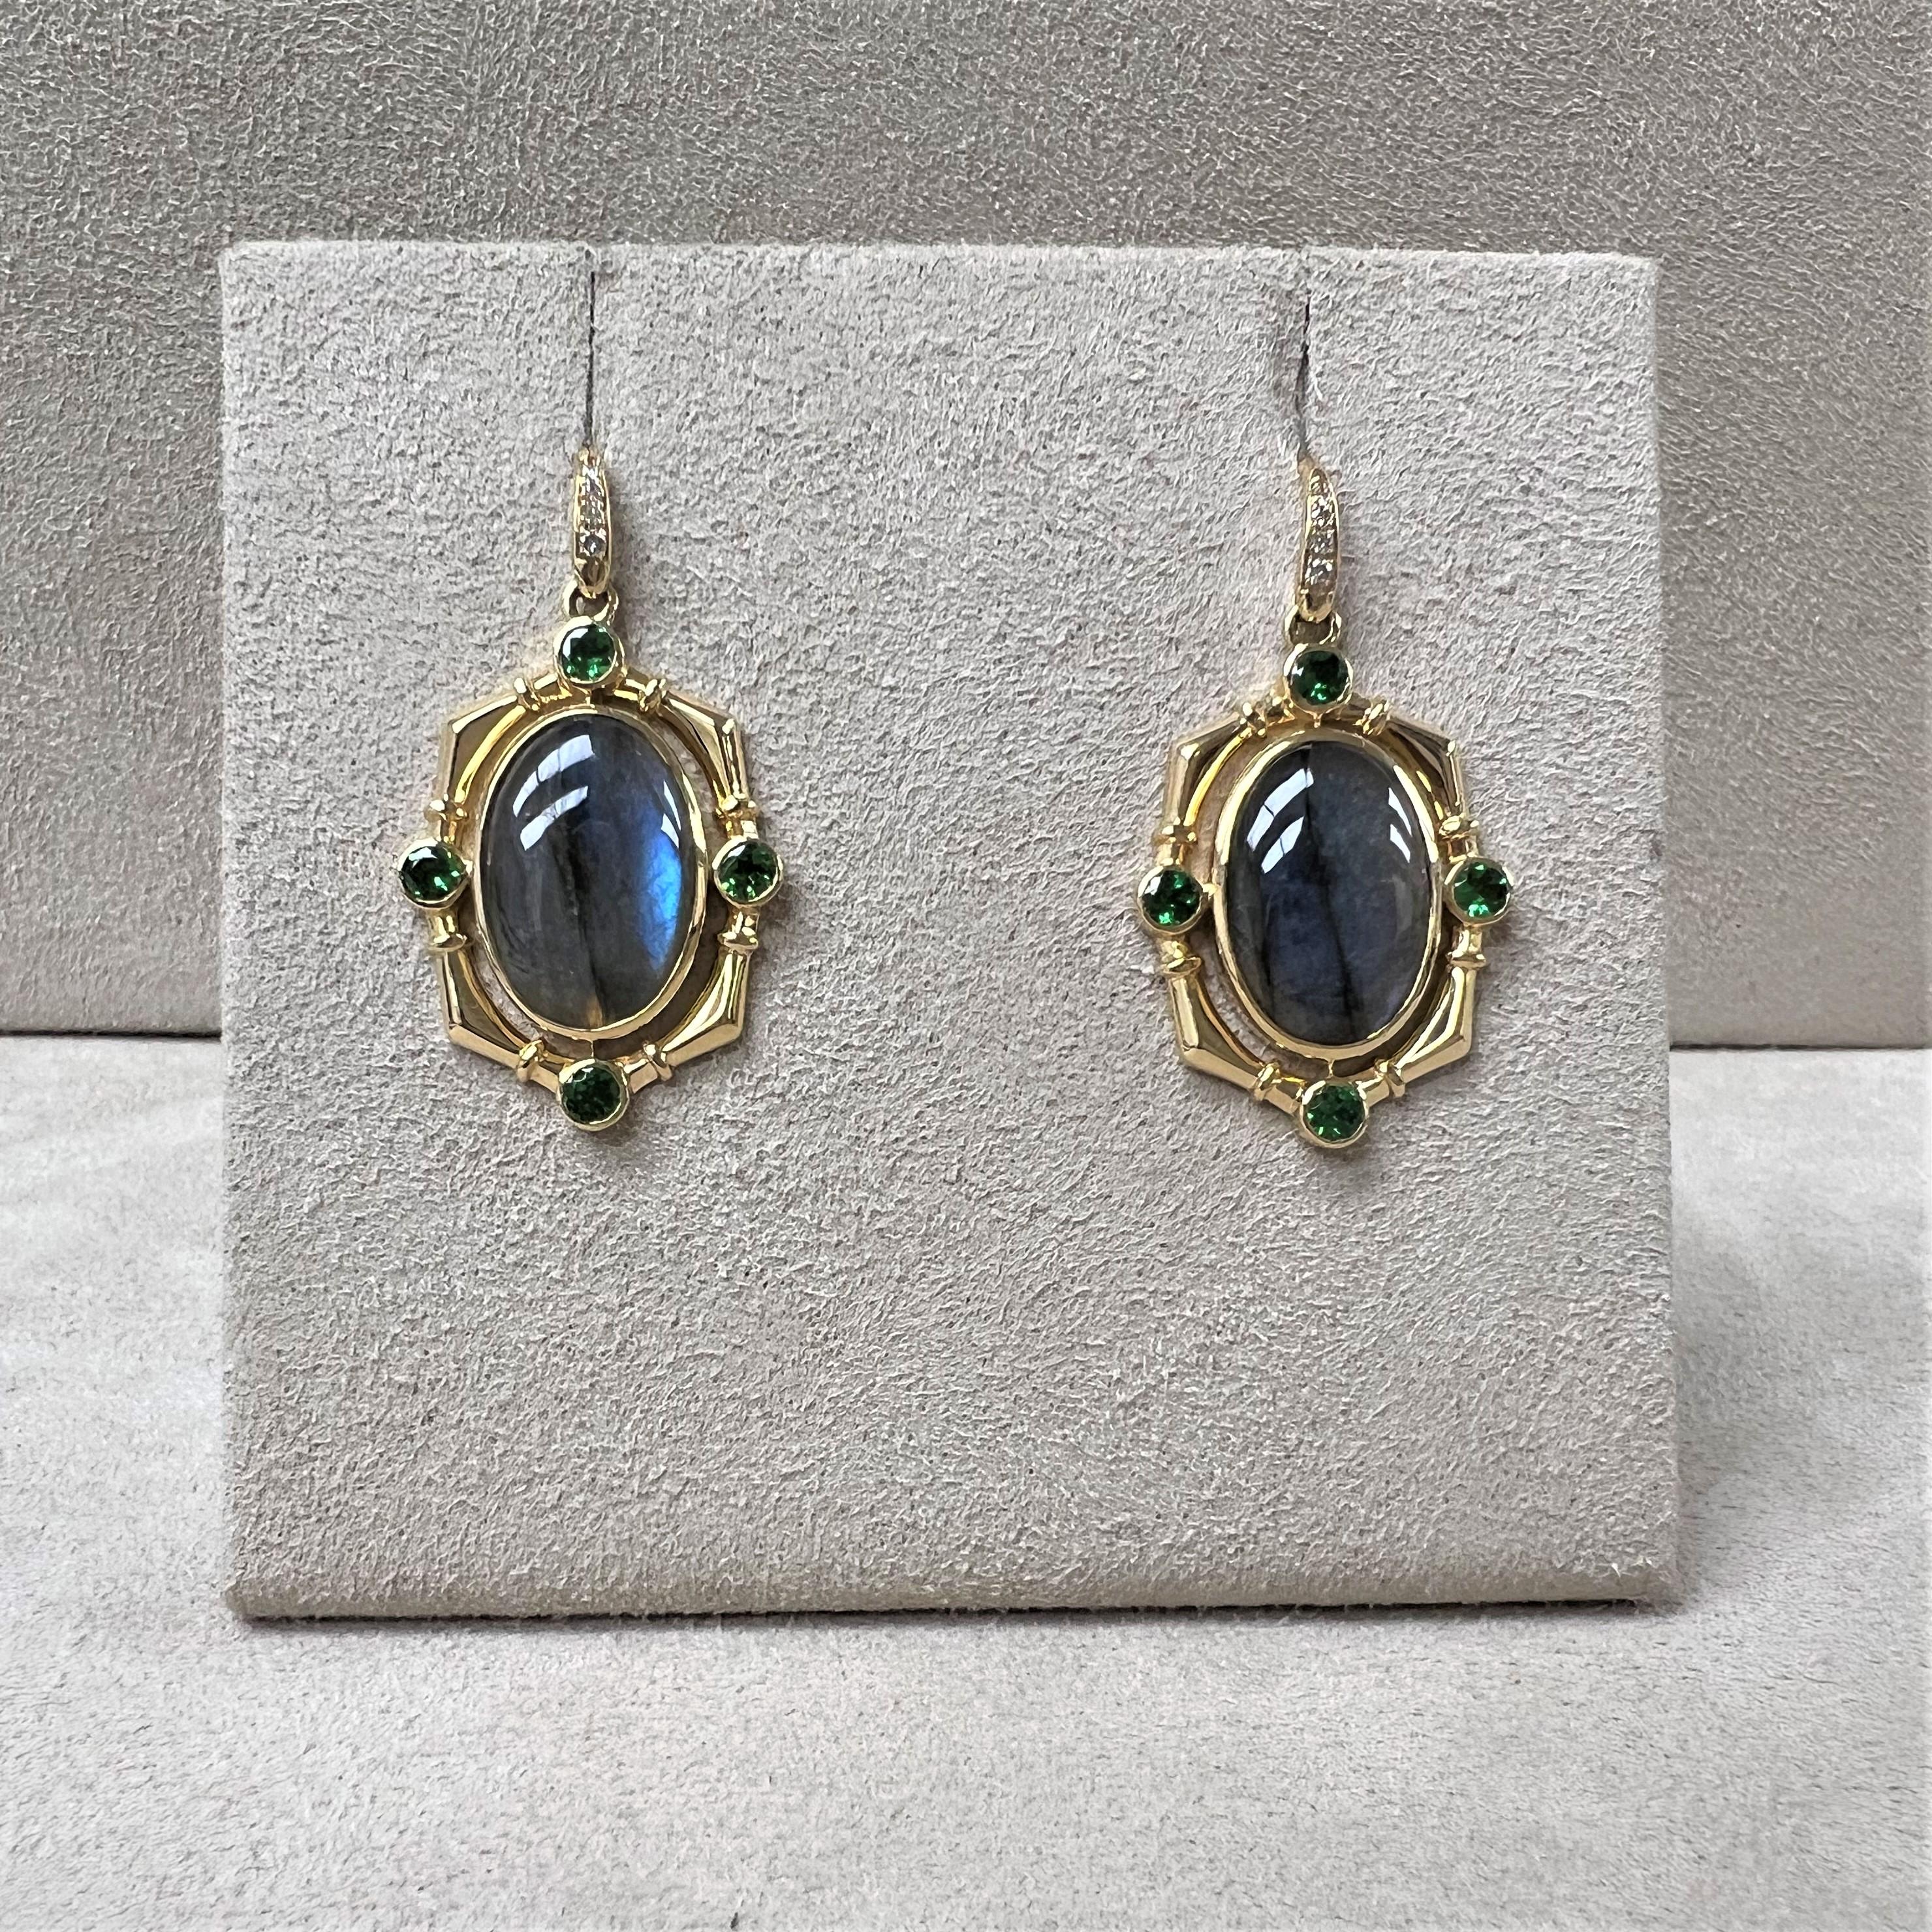 Created in 18 karat yellow gold
Labradorite 8 carats approx.
Tsavorites 0.70 carat approx.
Diamonds 0.05 carat approx.
French wire for pierced ears



About the Designers

Drawing inspiration from little things, Dharmesh & Namrata Kothari have